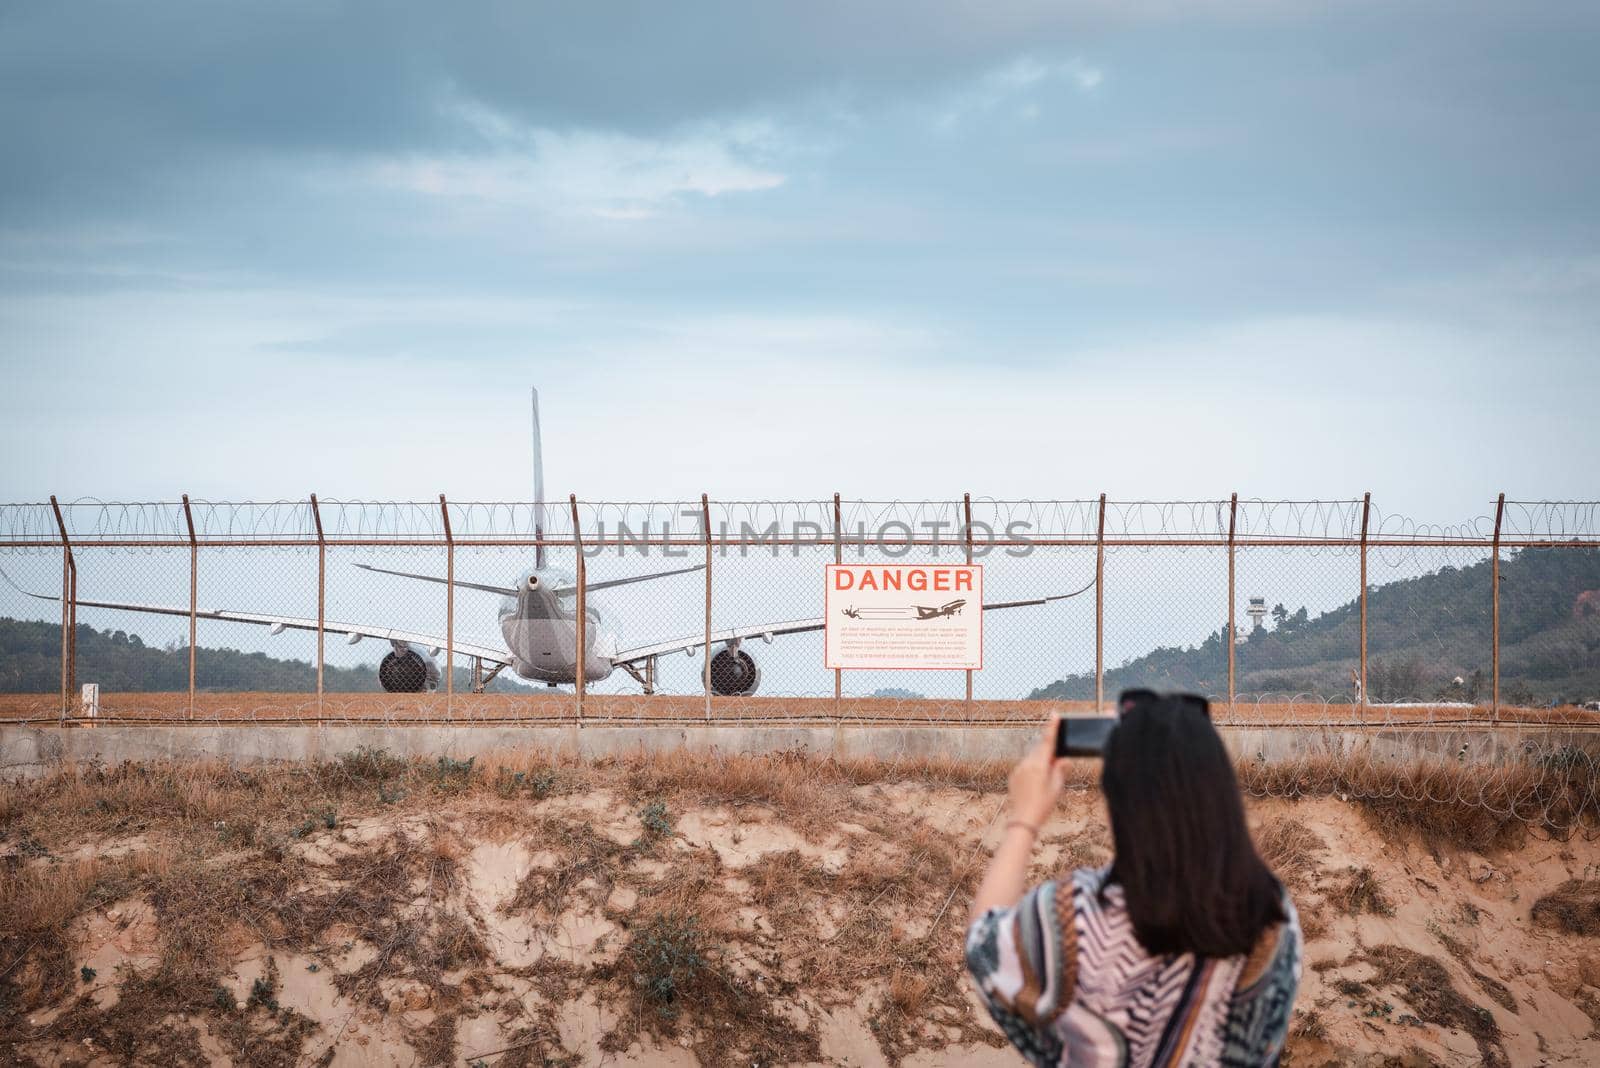 Tourist Woman is Capturing Photos The Airplane While Take off Landing on Runway Track From Outside The Airport. Asian Tourist Woman Having Fun With Photographic Vehicle Aircraft Beside Airport Fence.